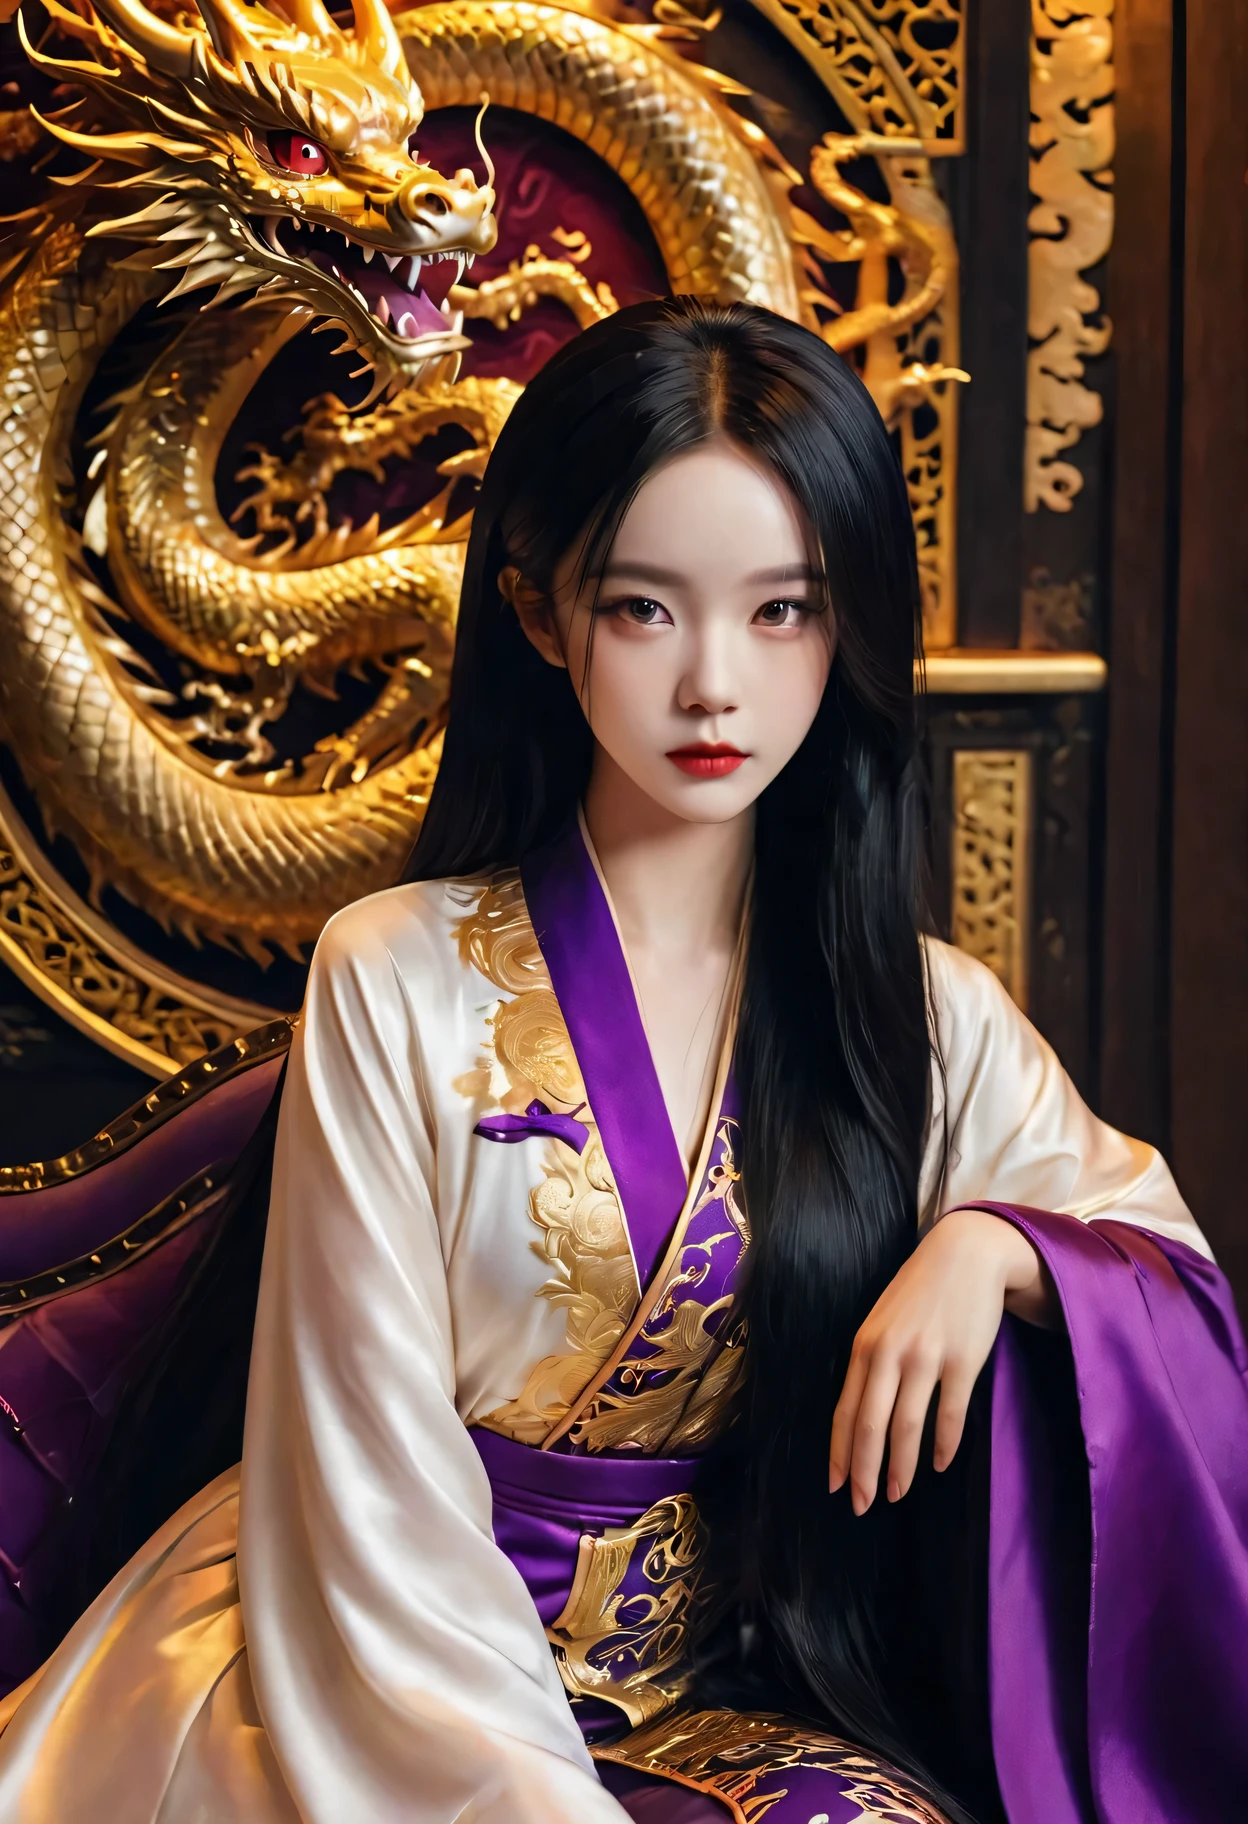 yandere girl,crazy purple eyes,red lipstick,pure white skin,long black hair,golden silk embroidered robe,dragon throne,palace background,luxurious decor,obsession,innocence,exquisite details,dramatic lighting,regal colors